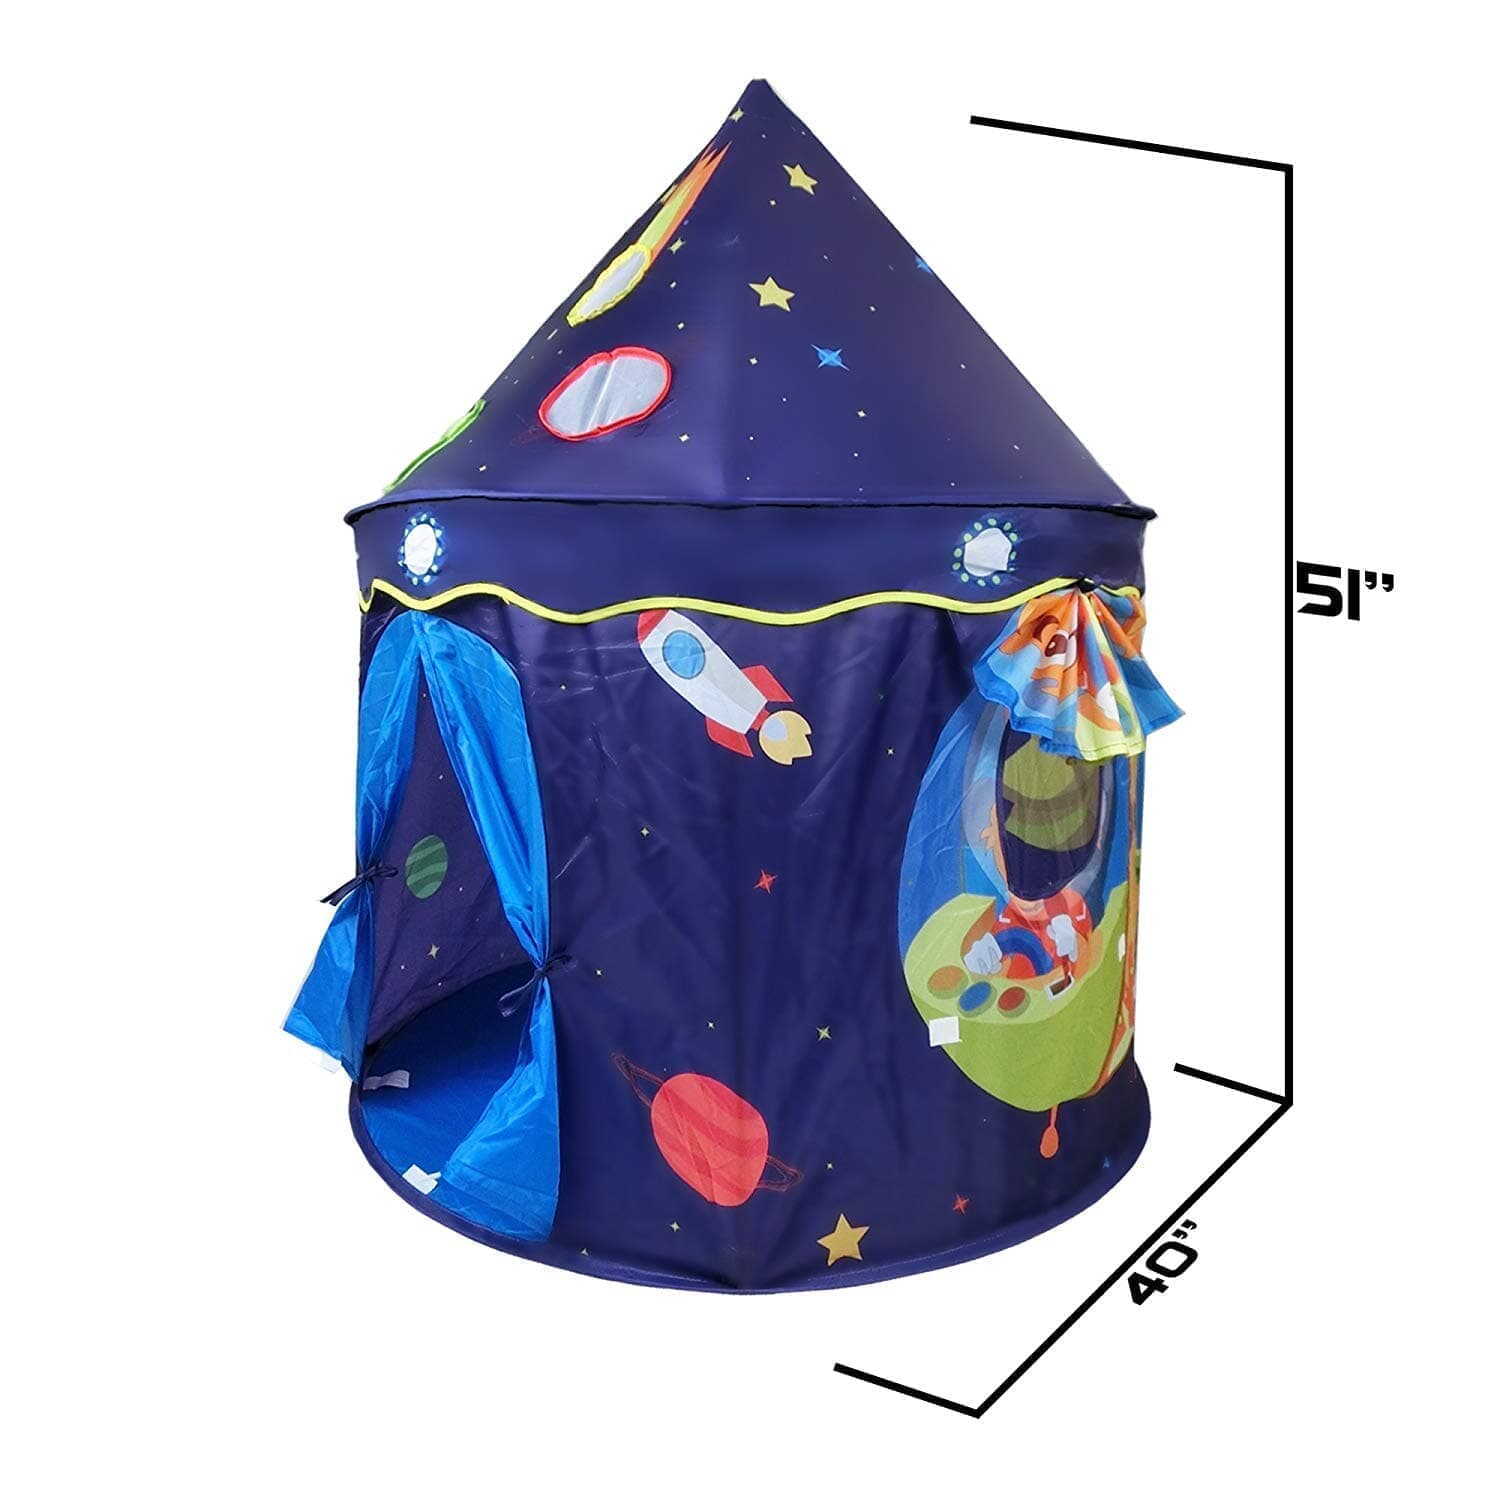 Kids Tent with Pop-Up Playhouse for Children Toddler to Birthday Gift Play Tent for Boys Girls  